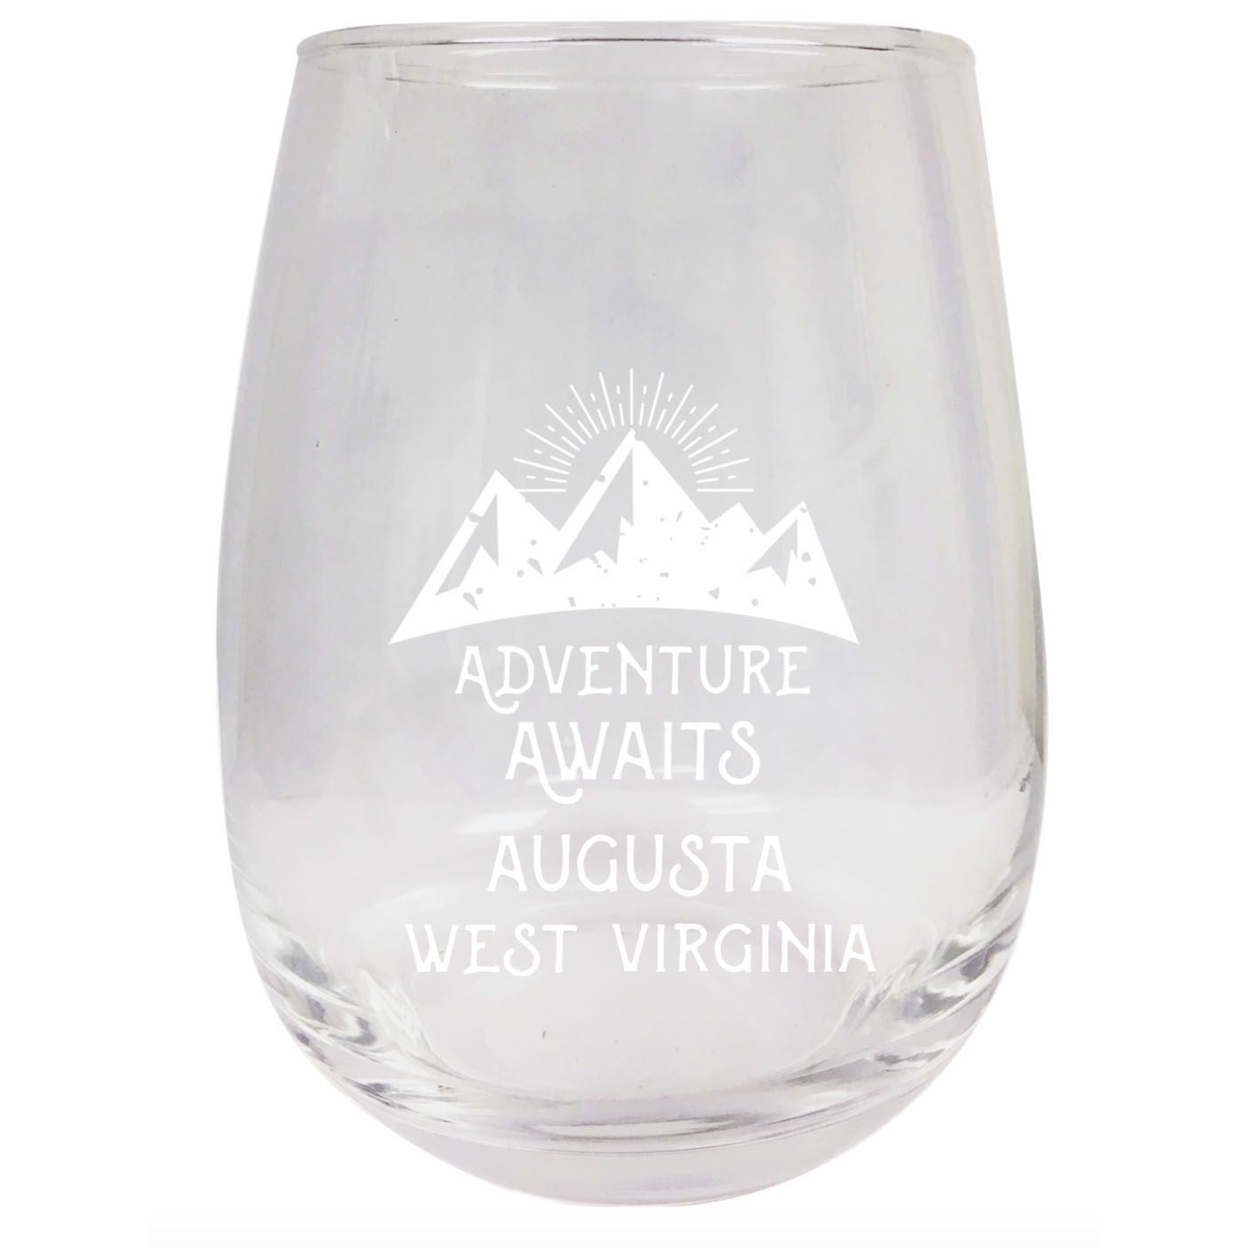 West Virginia Engraved Stemless Wine Glass Duo